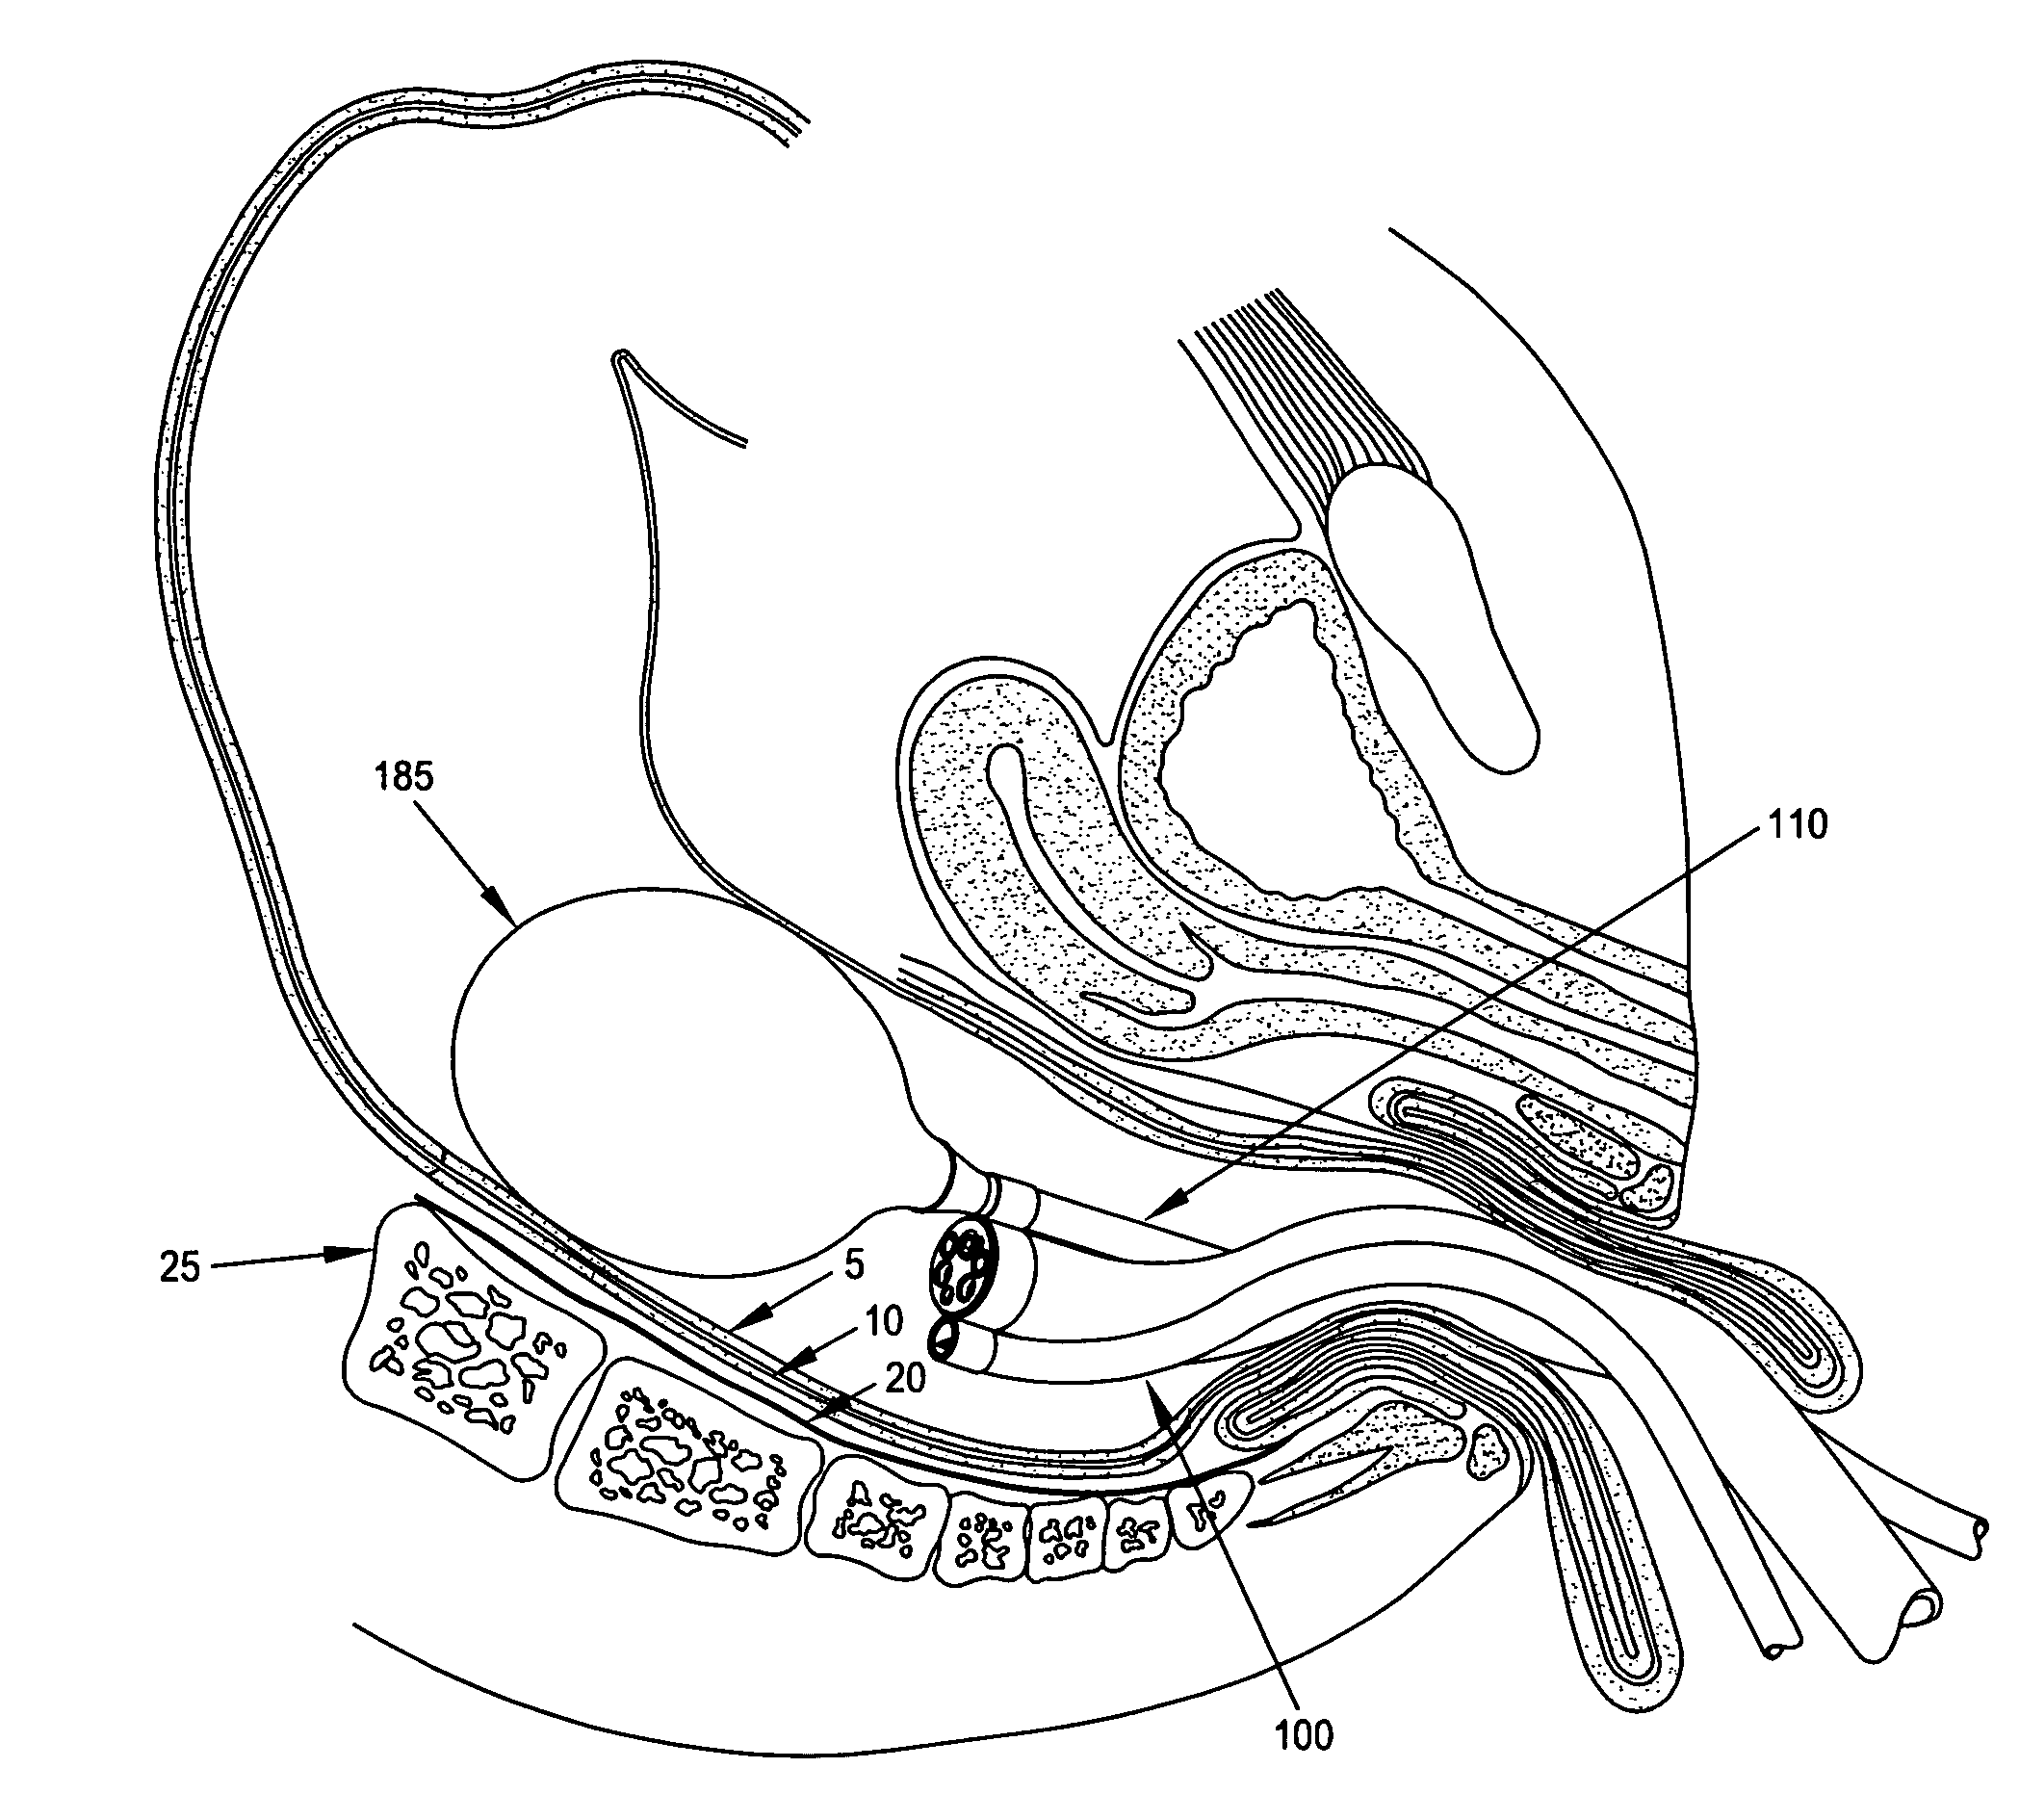 Method and apparatus for endoscopically treating rectal prolapse